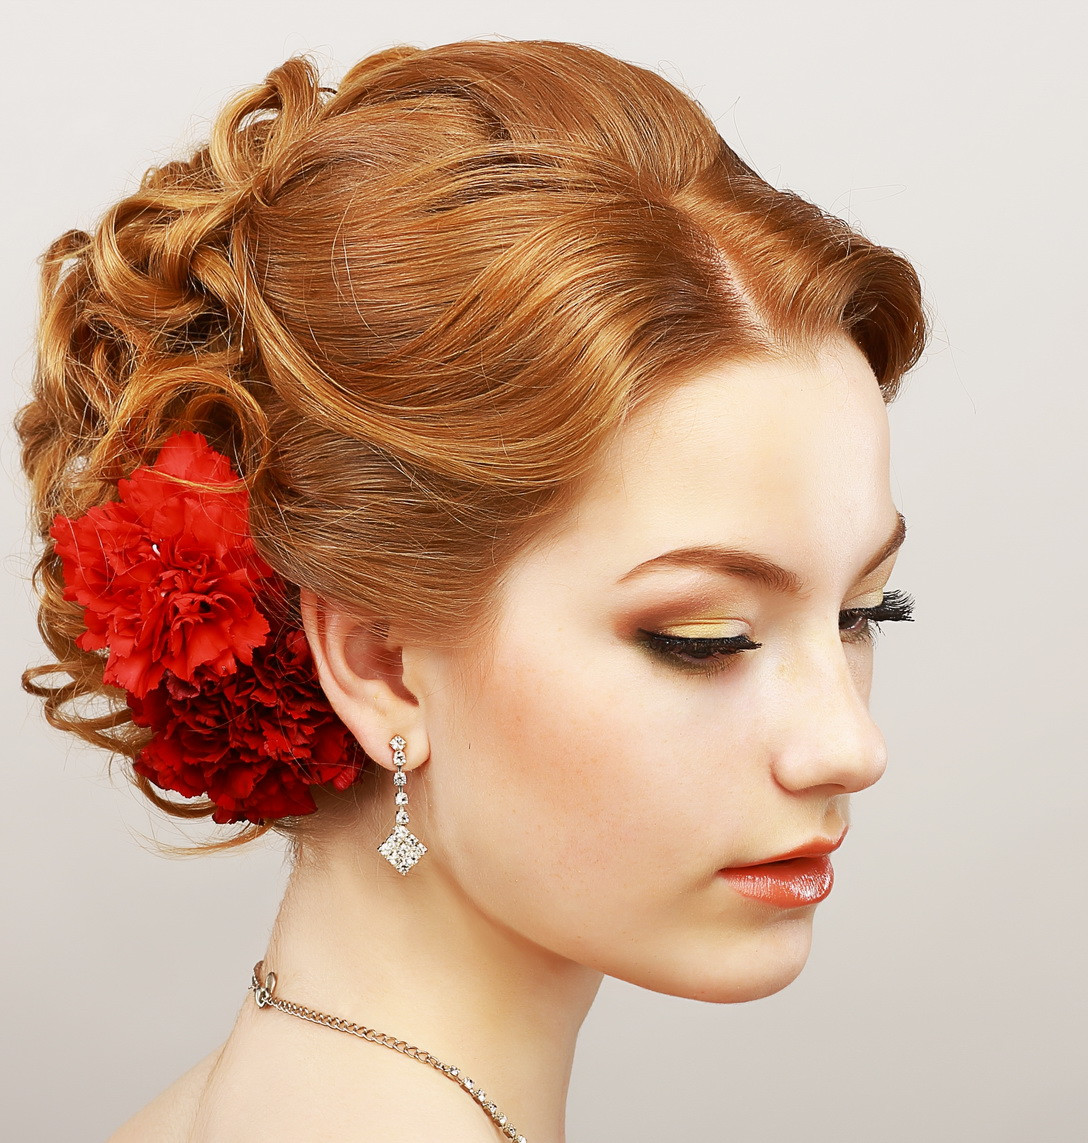 Hairstyle Updos Prom
 16 Easy Prom Hairstyles for Short and Medium Length Hair